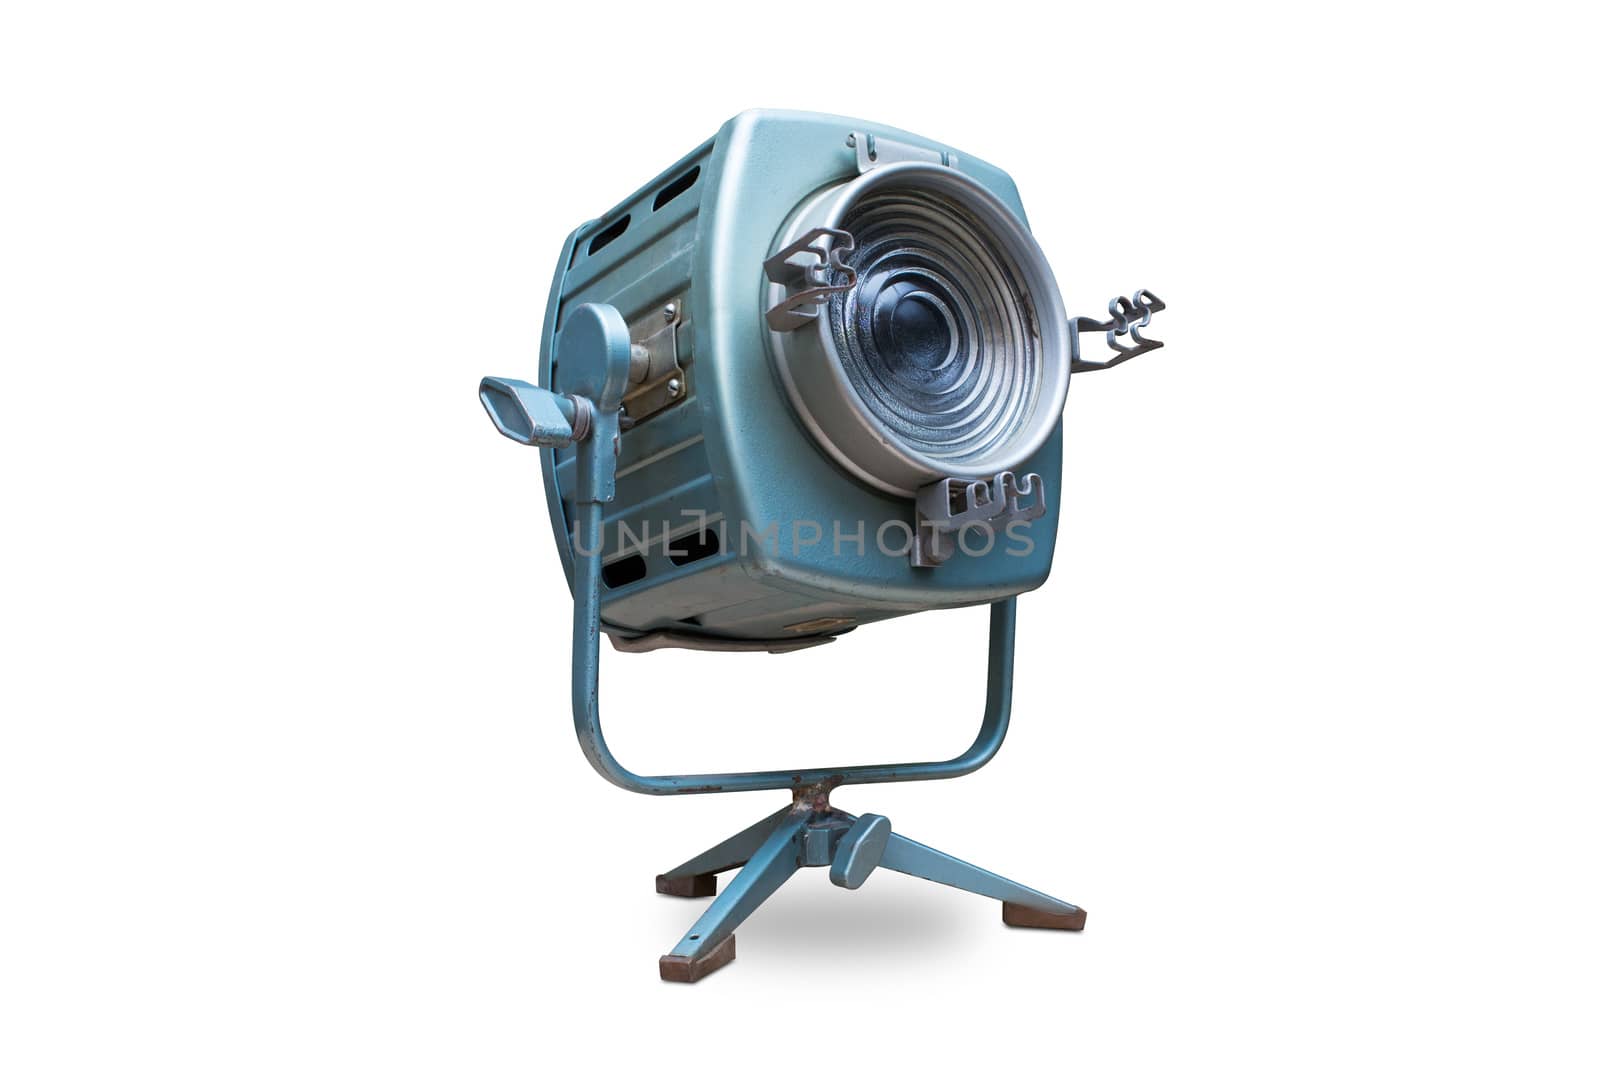 Studio spotlight lighting equipment with stand. Electrical source of constant light, cyan color, used with traces of use and rust, halogen bulb. Isolated on white background, clipping path included.